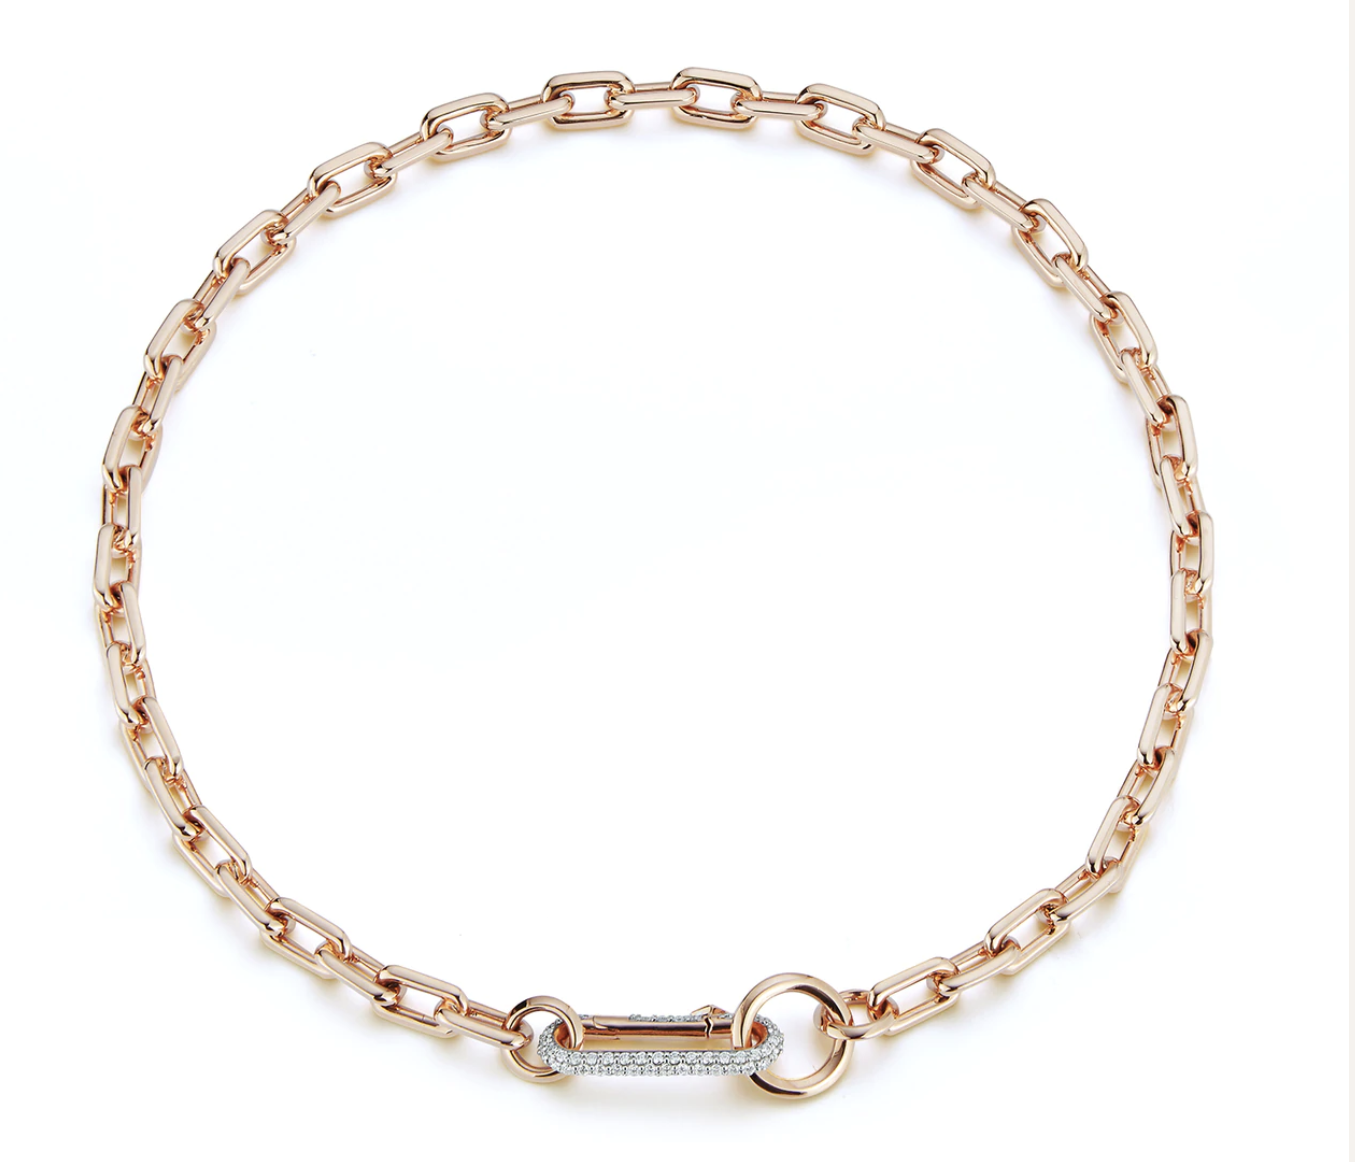 Saxon 18k Rose Gold Chain Link Necklace with Elongated Diamond Link Clasp 